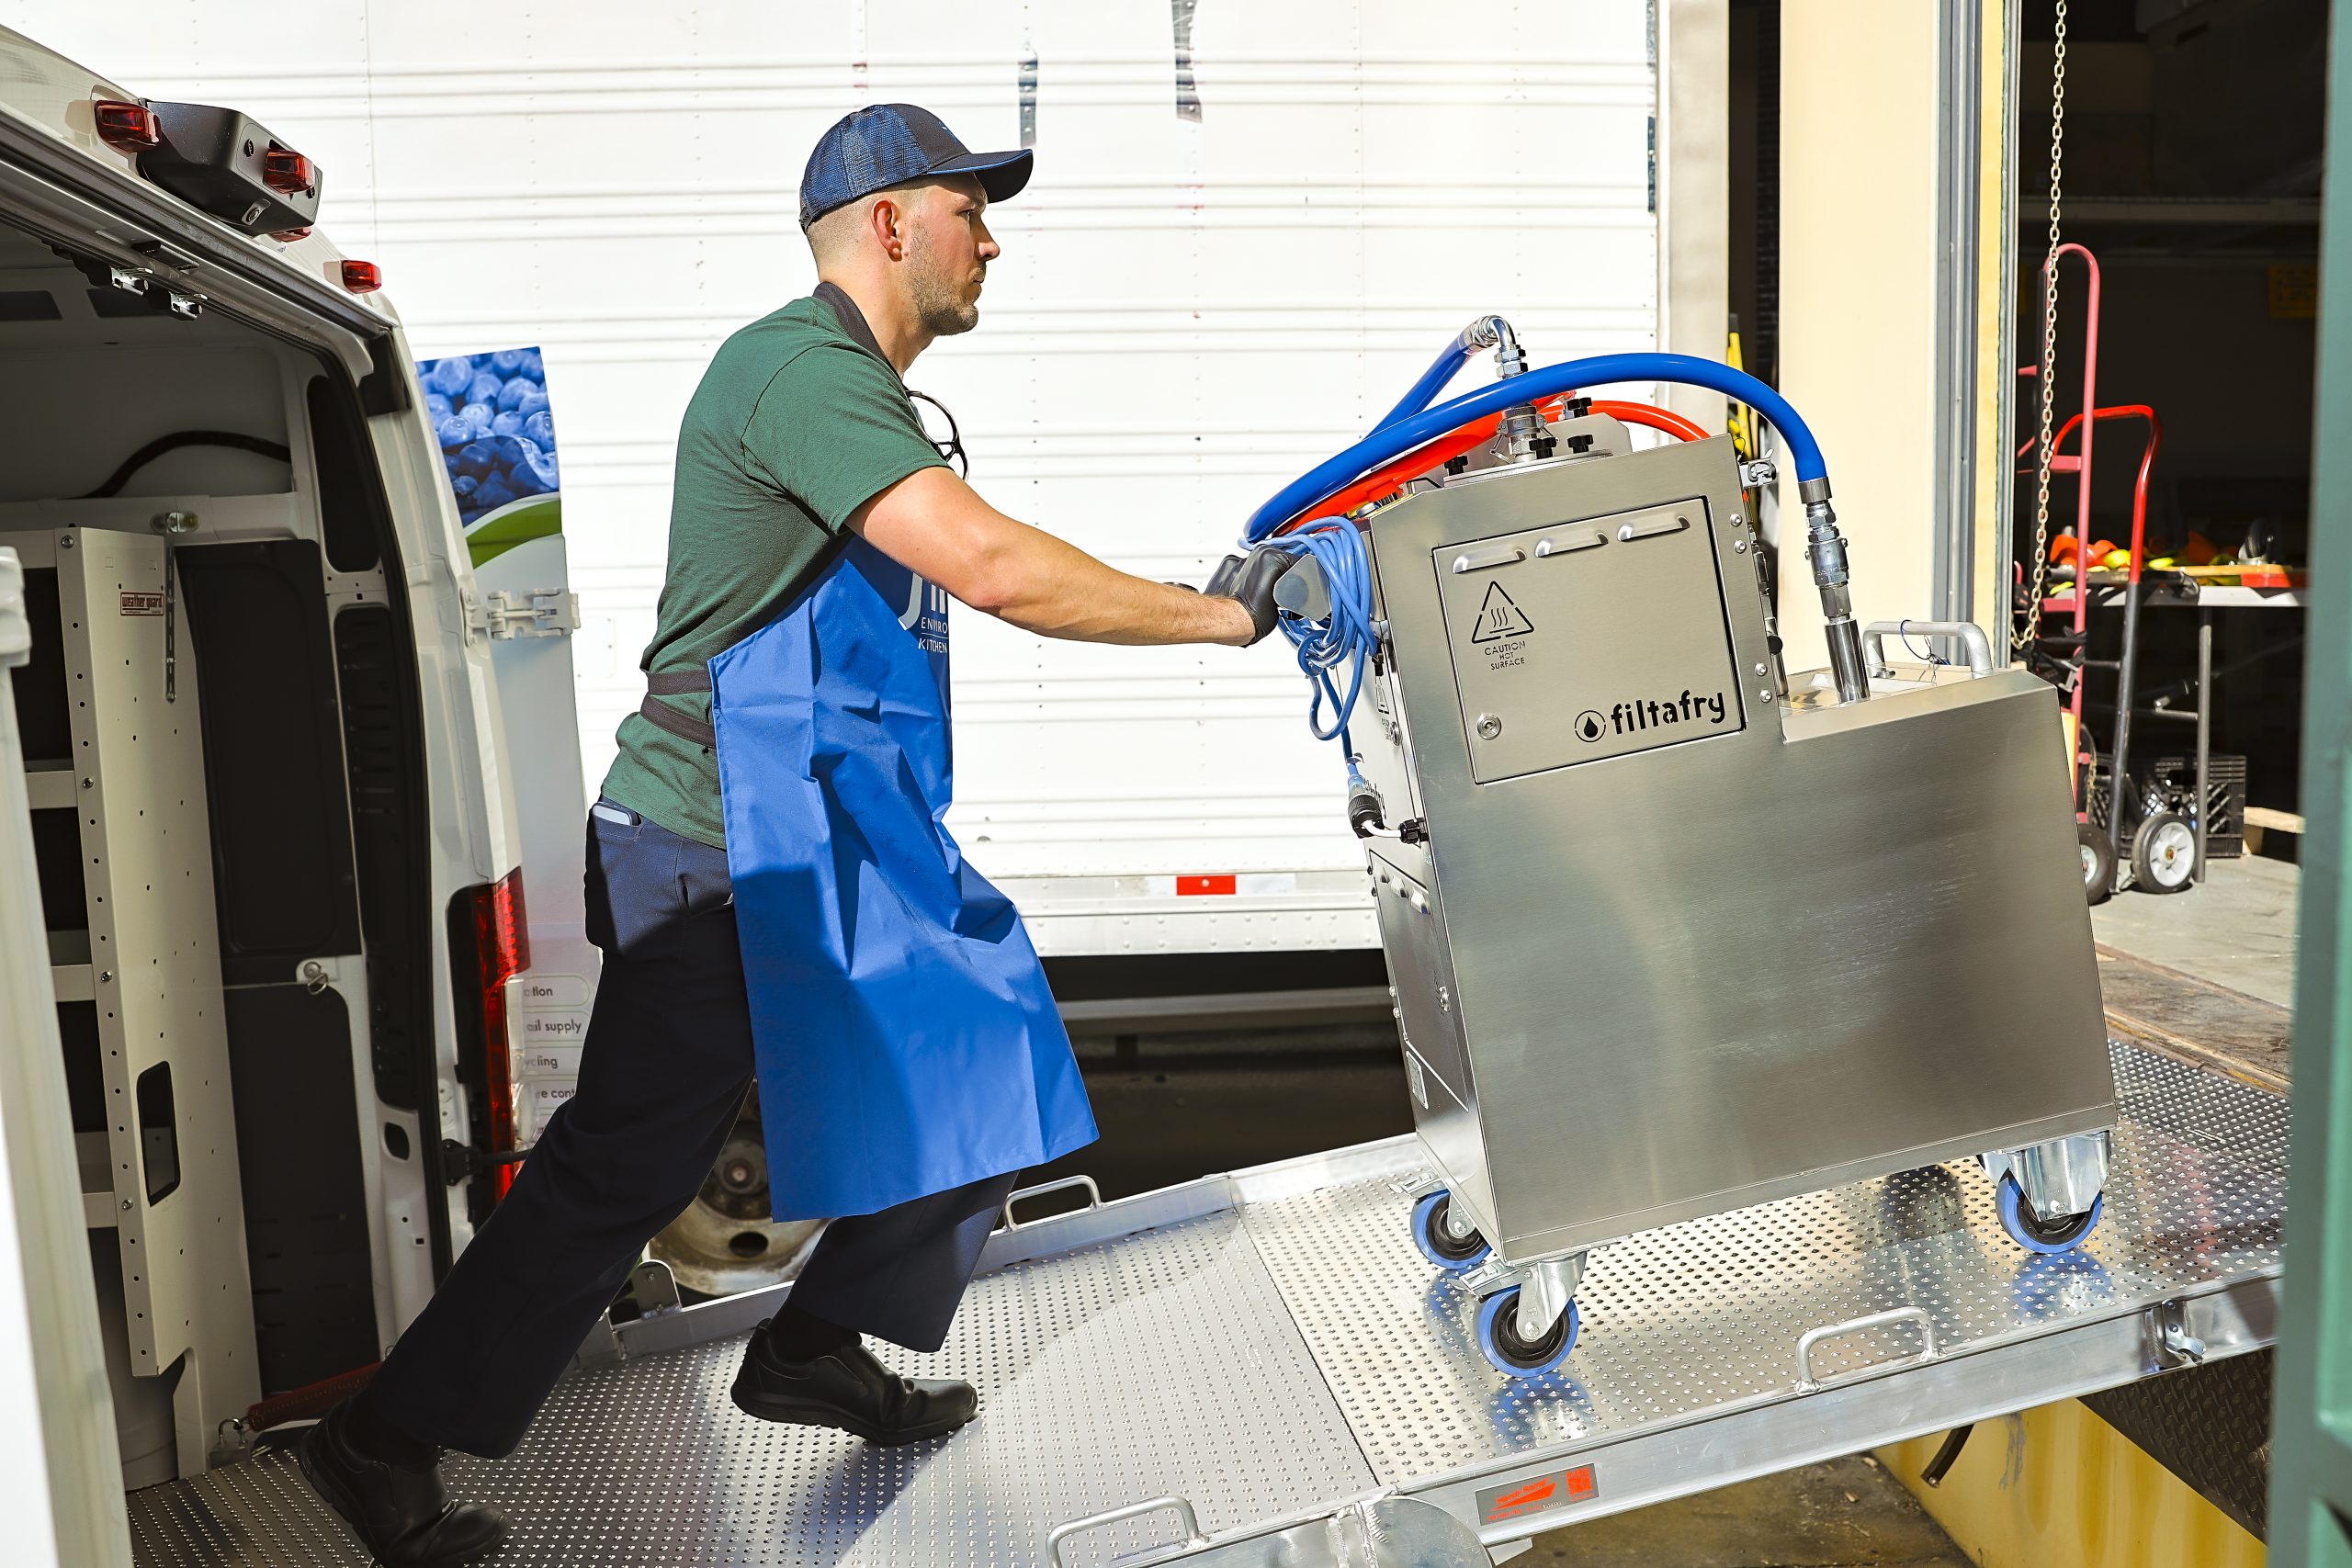 A person in a hat and blue uniform pushing an cooking oil filtration unit up a ramp.